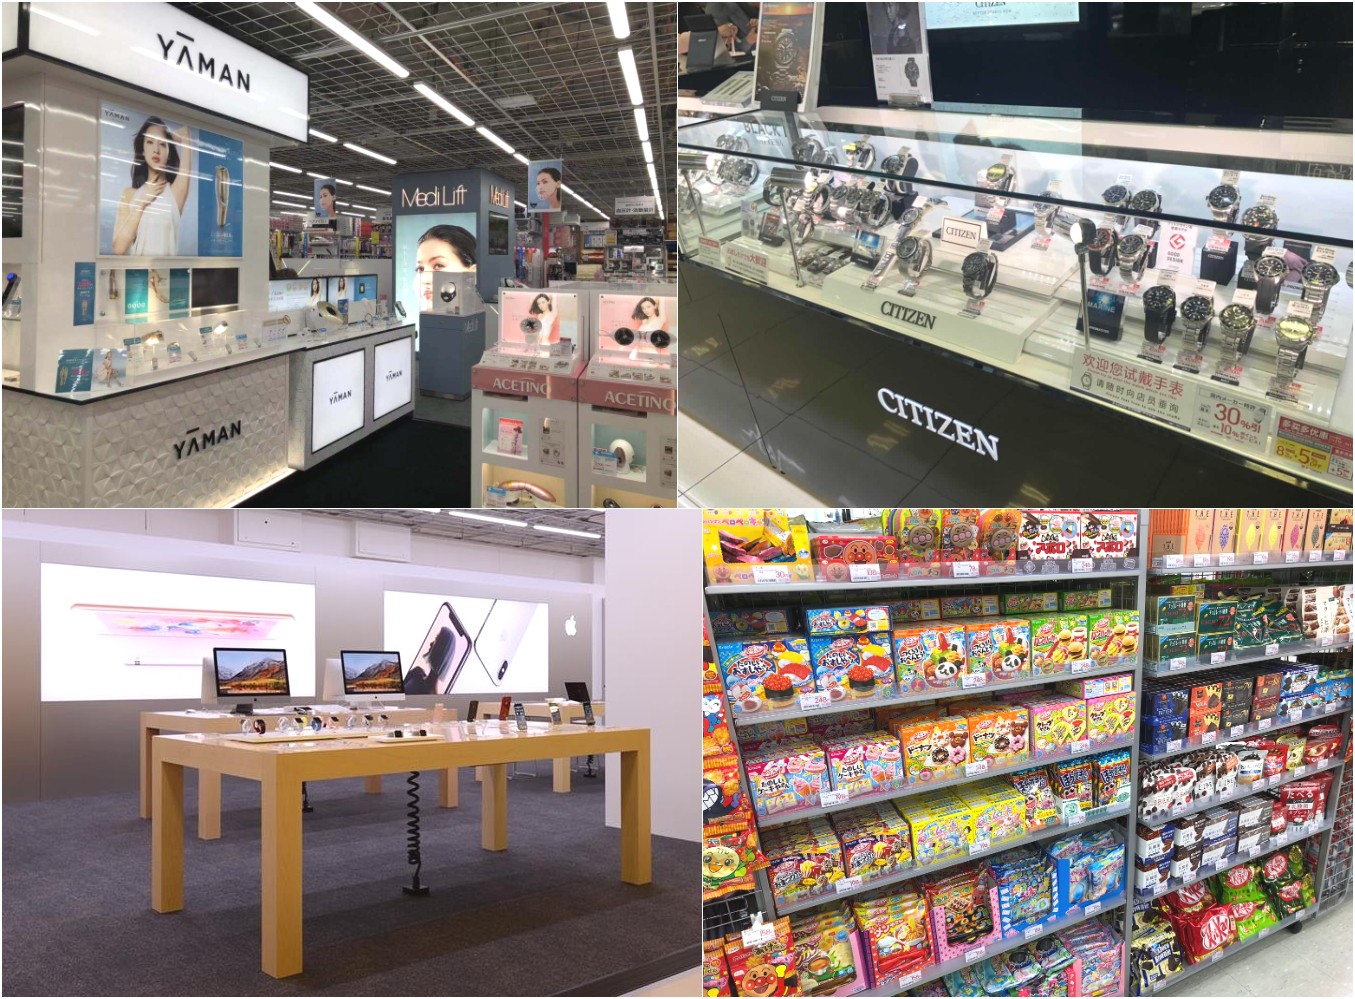 They don’t just sell cameras! From popular appliances and watches to beauty products and snacks—enjoy a full day of fun shopping at electronics giant BicCamera!